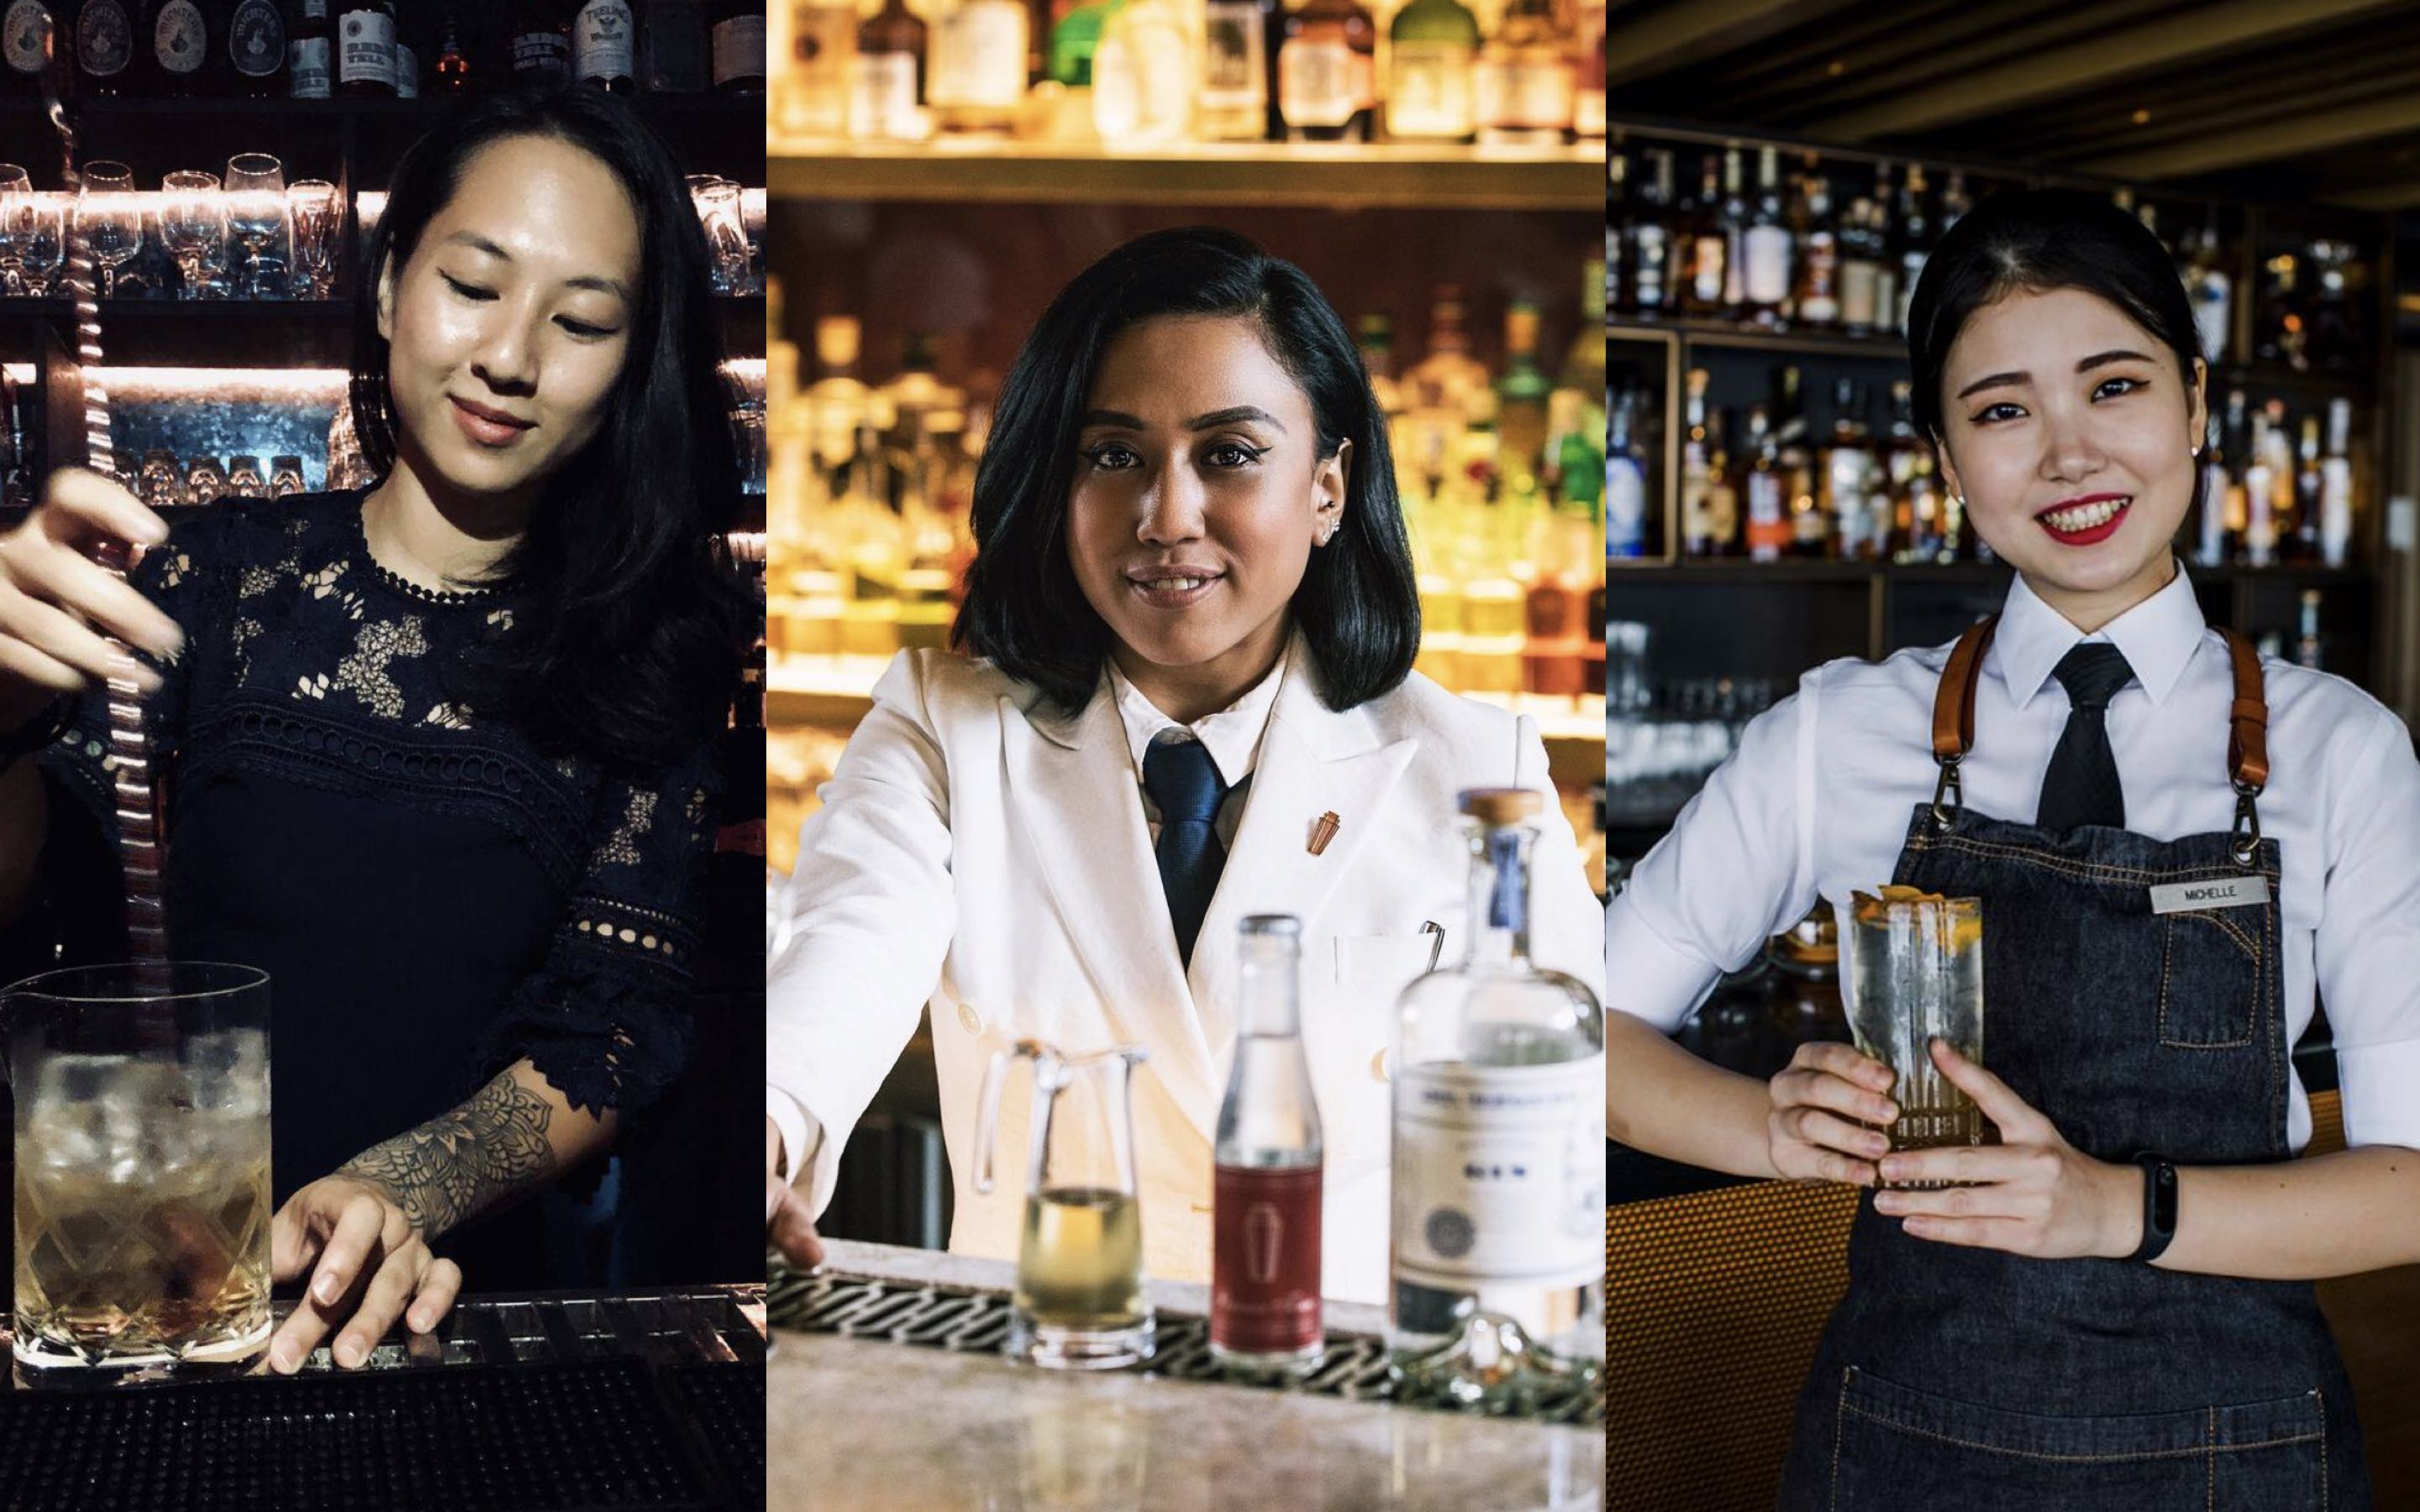 Hong Kong speakeasy Stockton will be celebrating International Womens’ Day by hosting three of Hong Kong and Singapore’s best bartenders. From left to right, they are Arlene Wong (The Pontiac), Yana Kamaruddin (Atlas, Singapore), and Michelle Ki (Chihuly Lounge, Singapore). Photos via Facebook.